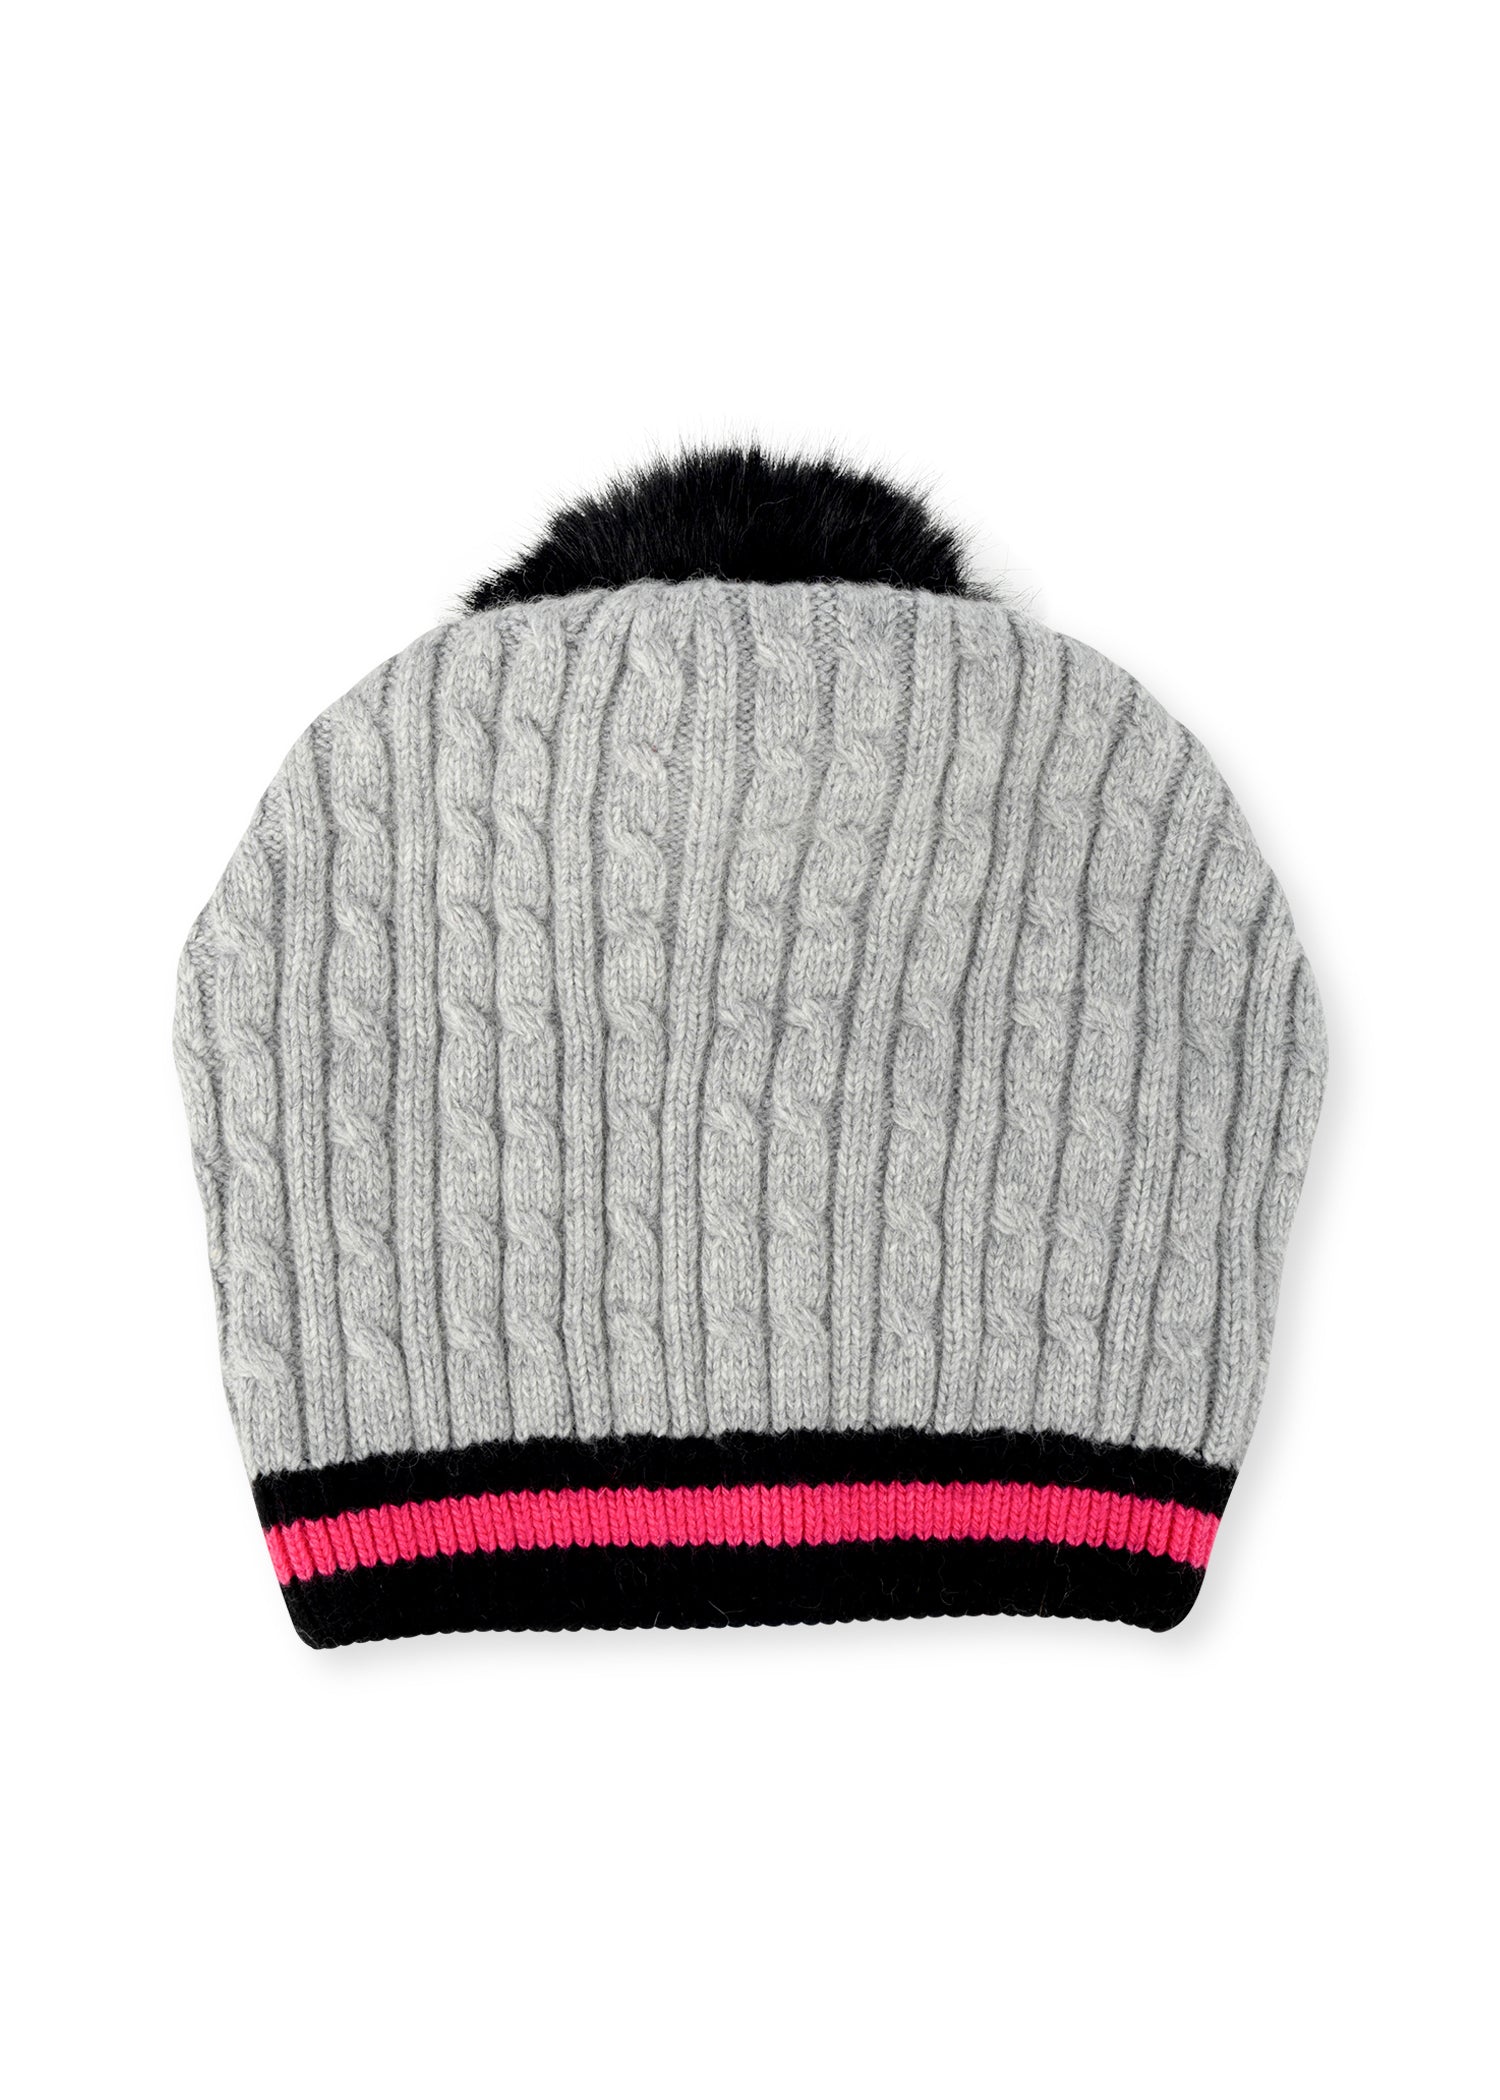 Crosstown Cabin Cable Hat